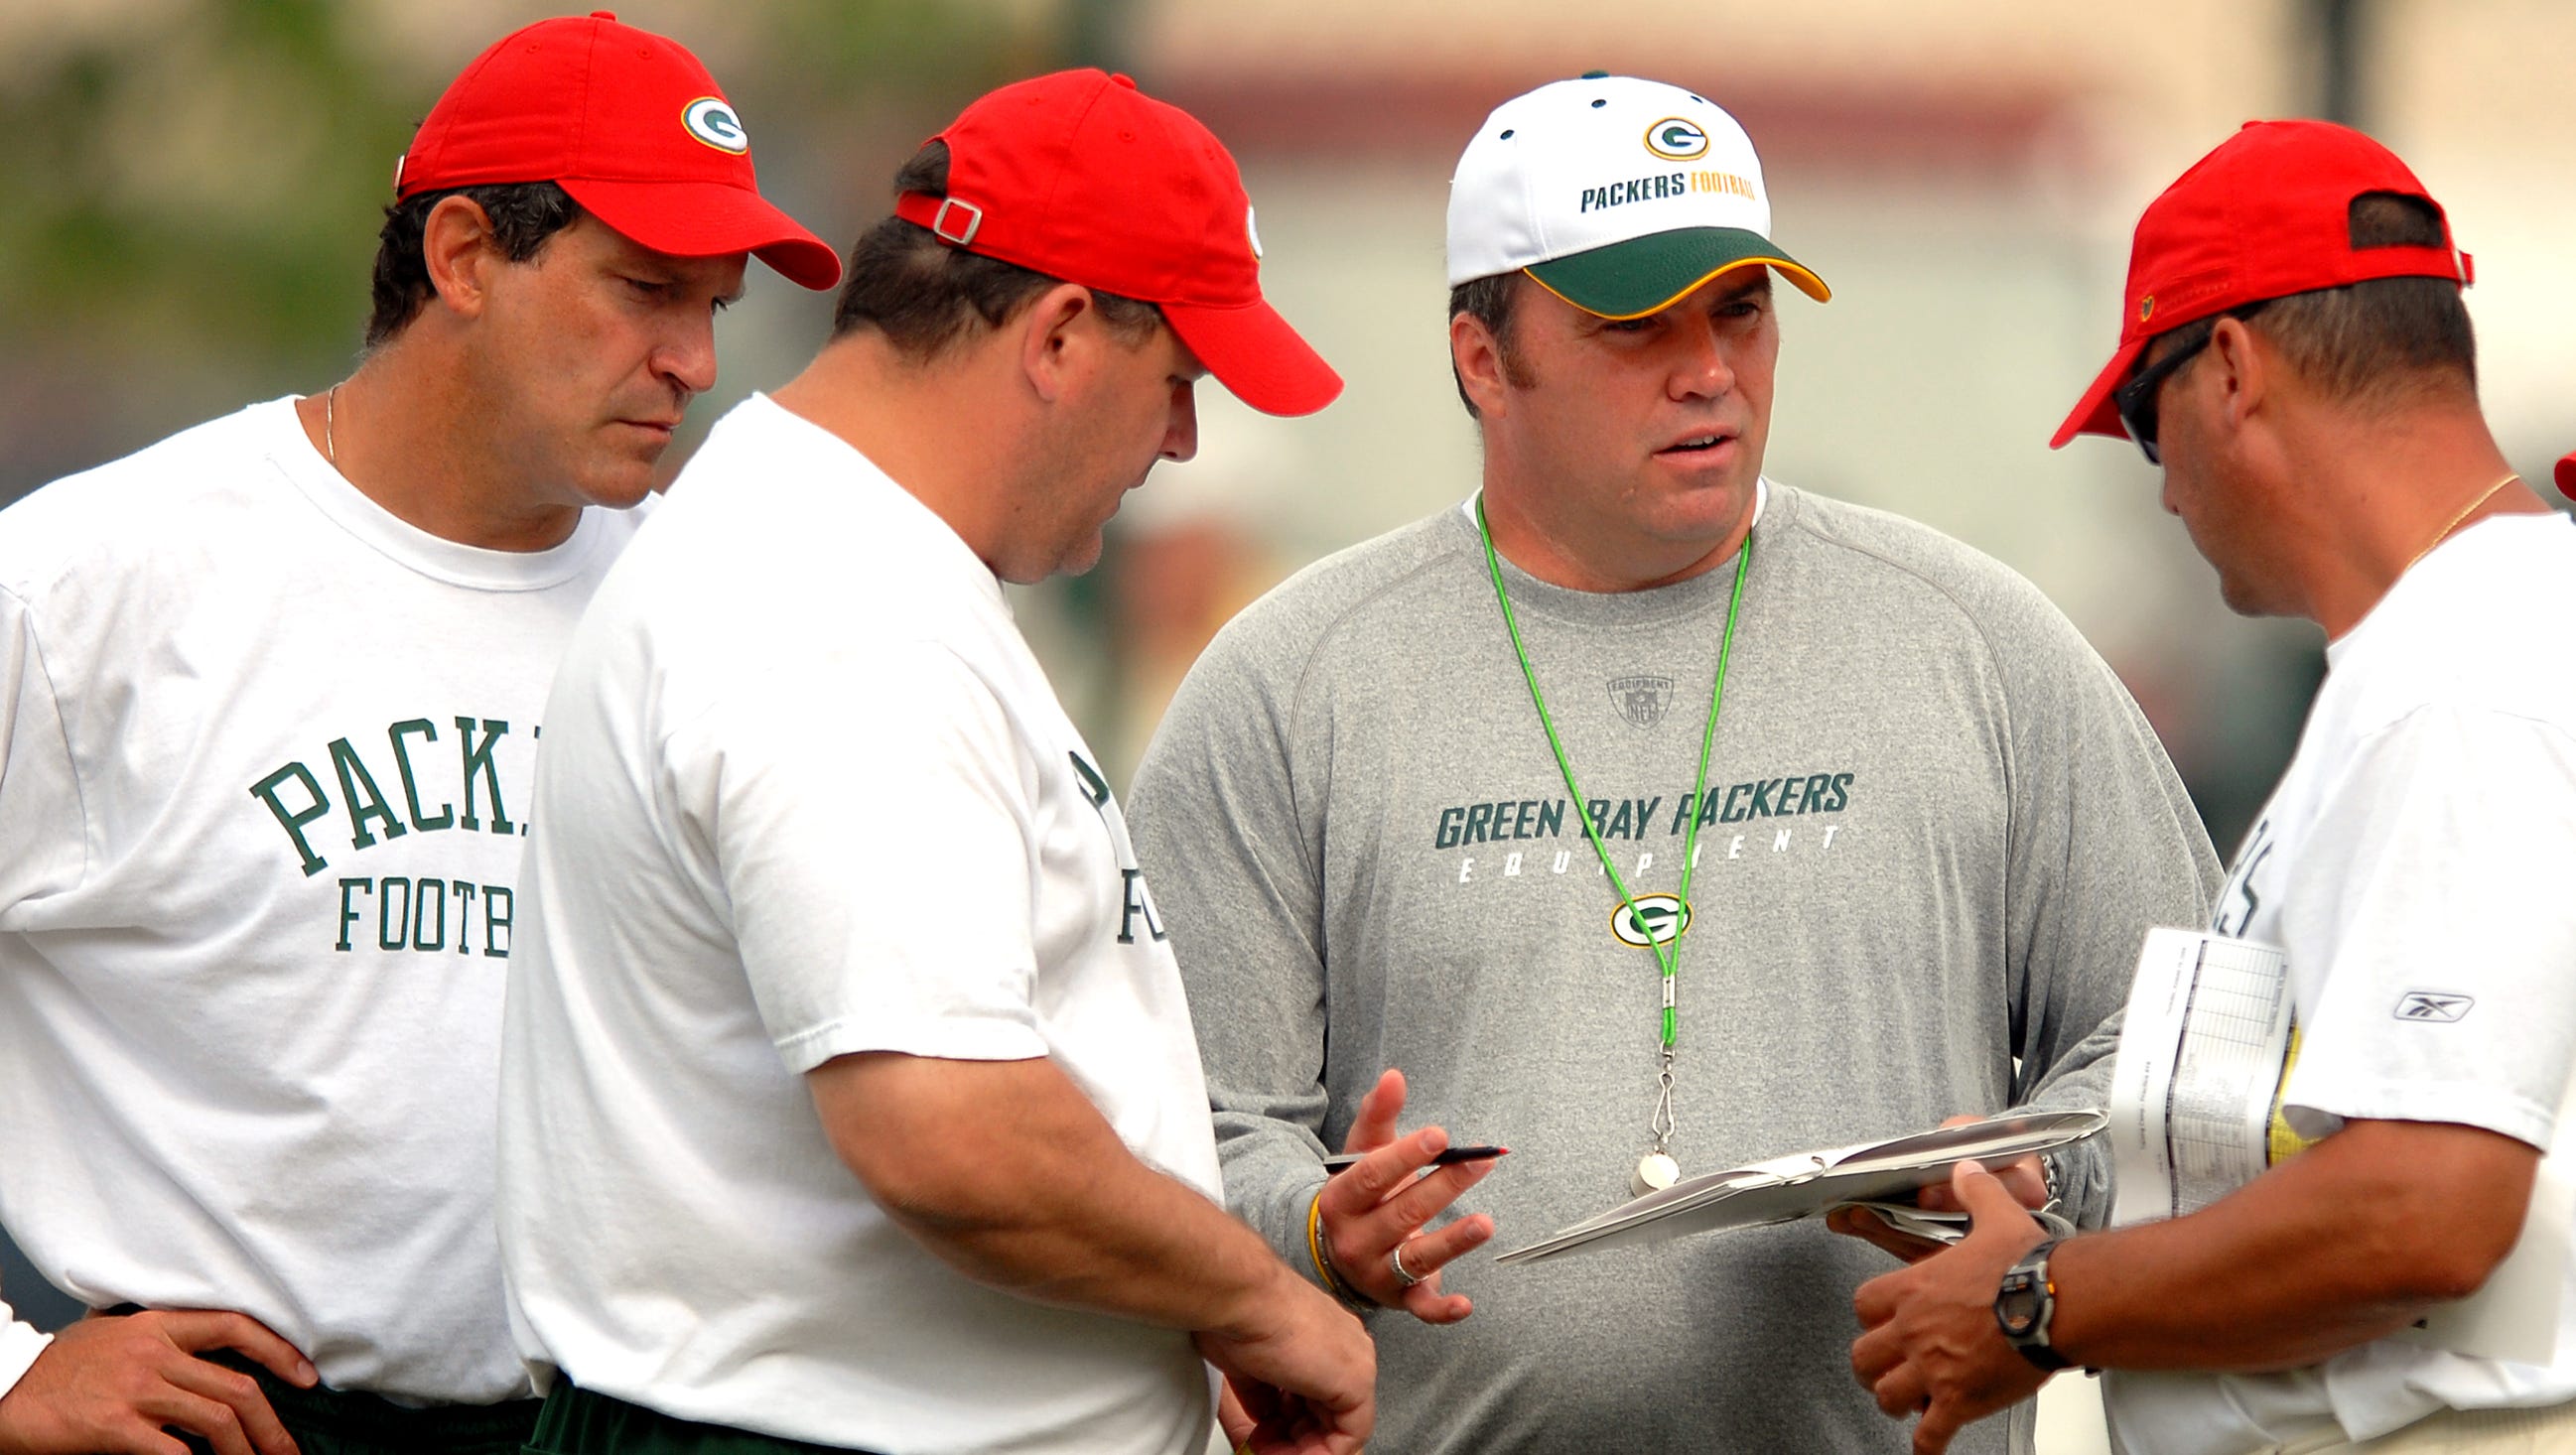 Packers coach Mike McCarthy, second from right, gathers with part of his staff during a 2006 training camp practice at Clarke Hinkle Field.